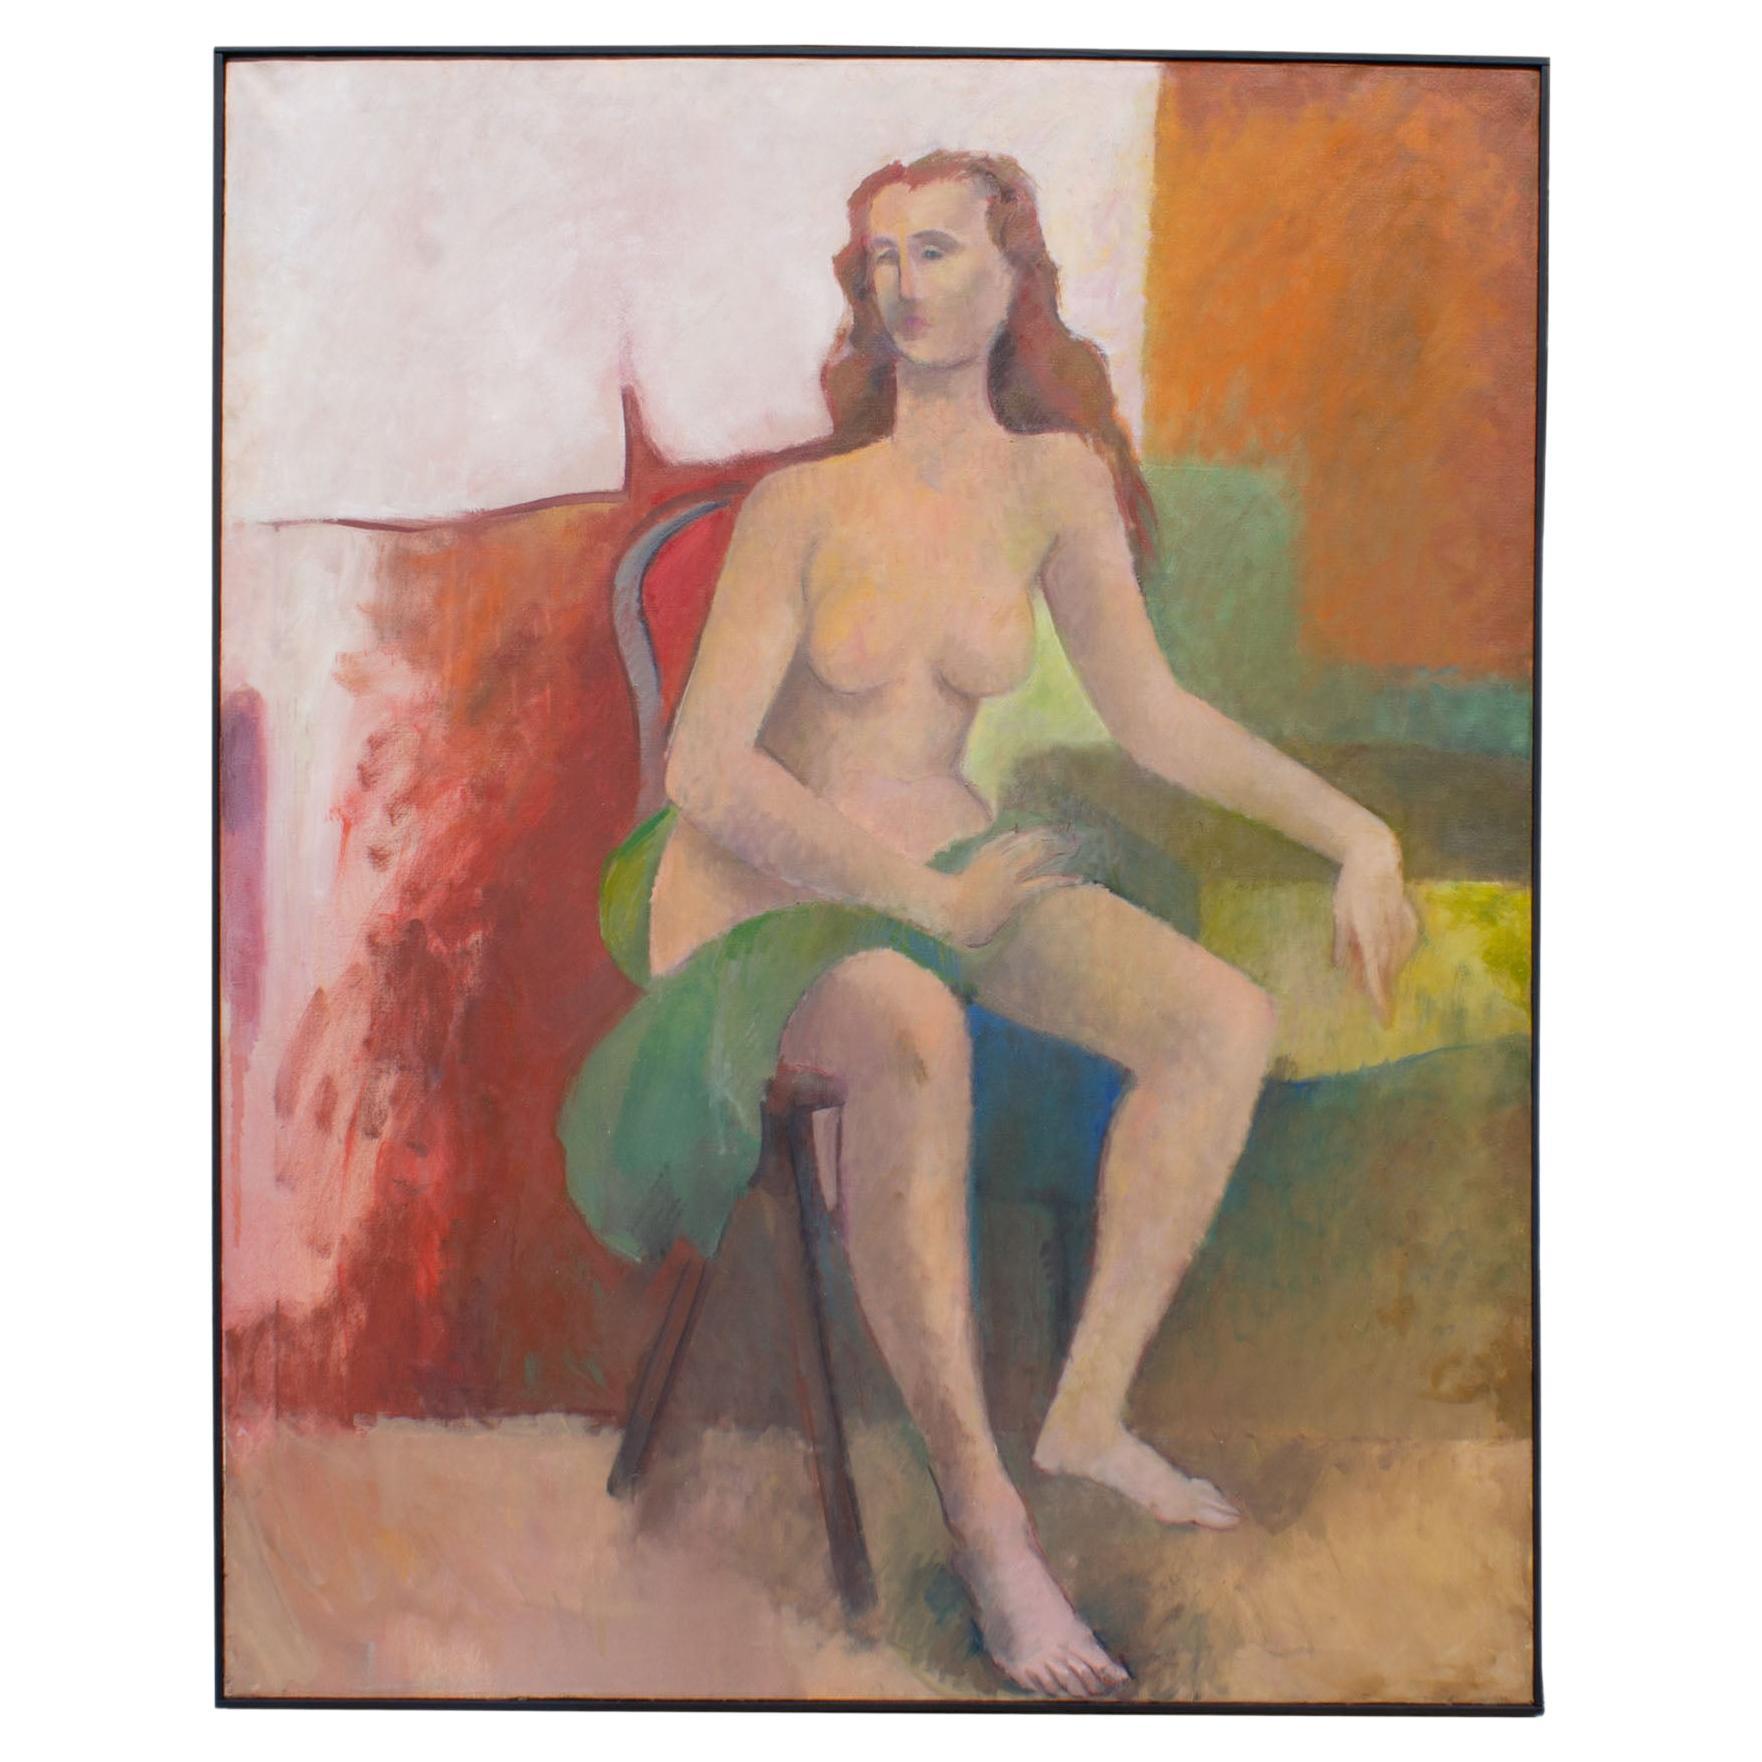 Walter Stomps Signed 1959 “Seated Nude” Oil on Canvas Abstract Painting For Sale